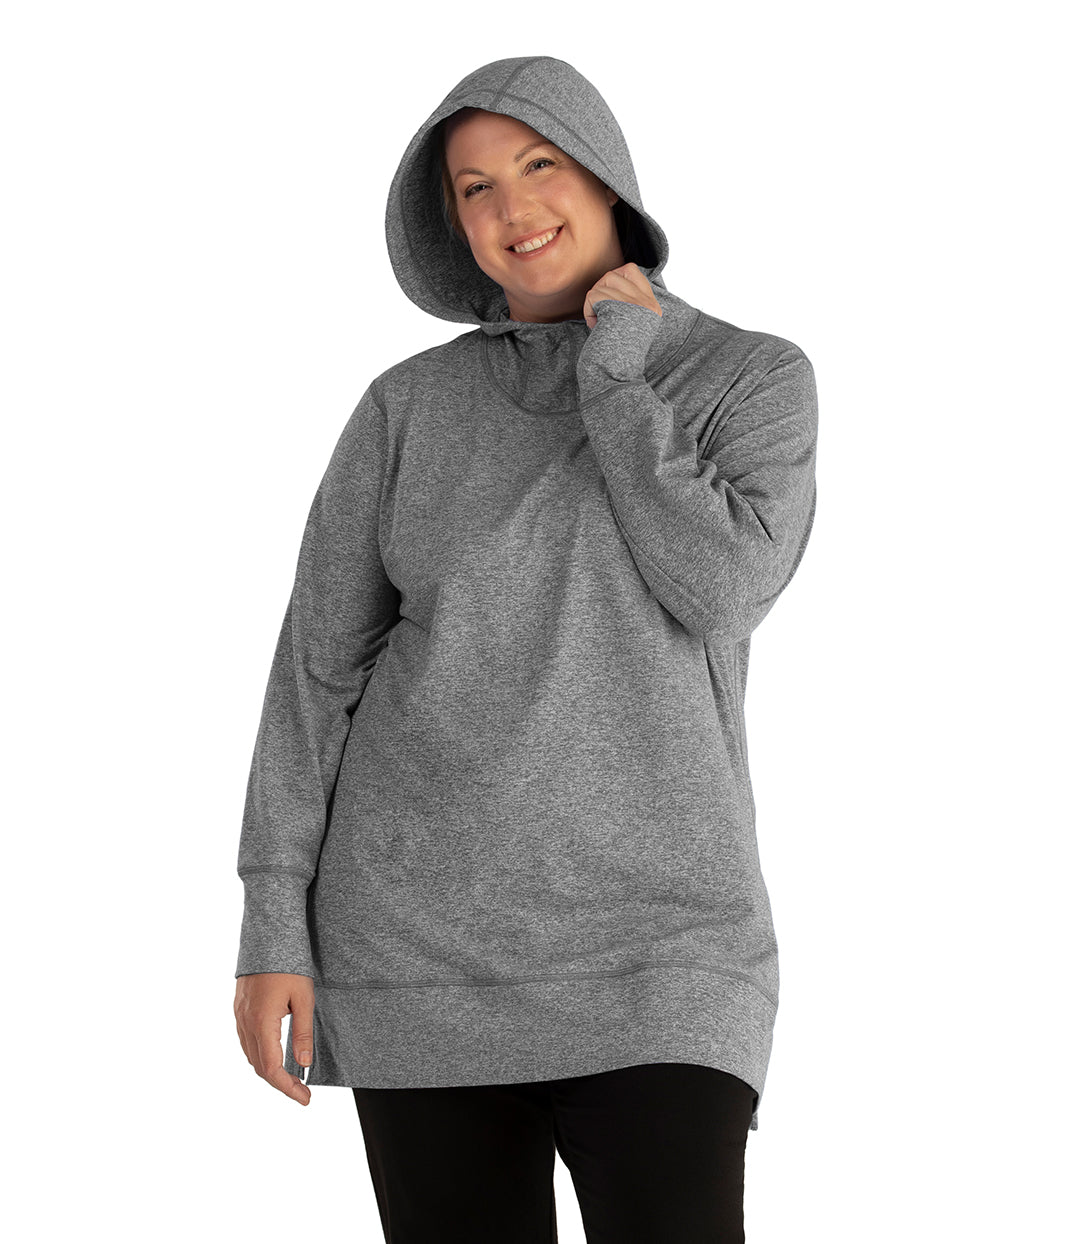 Plus size woman, facing front, wearing JunoActive plus size SoftWik Long Sleeve Hoodie in the color Heather Grey. She has the hood up on her head, covering her hair. She is wearing JunoActive Plus Size Leggings in the color Black.